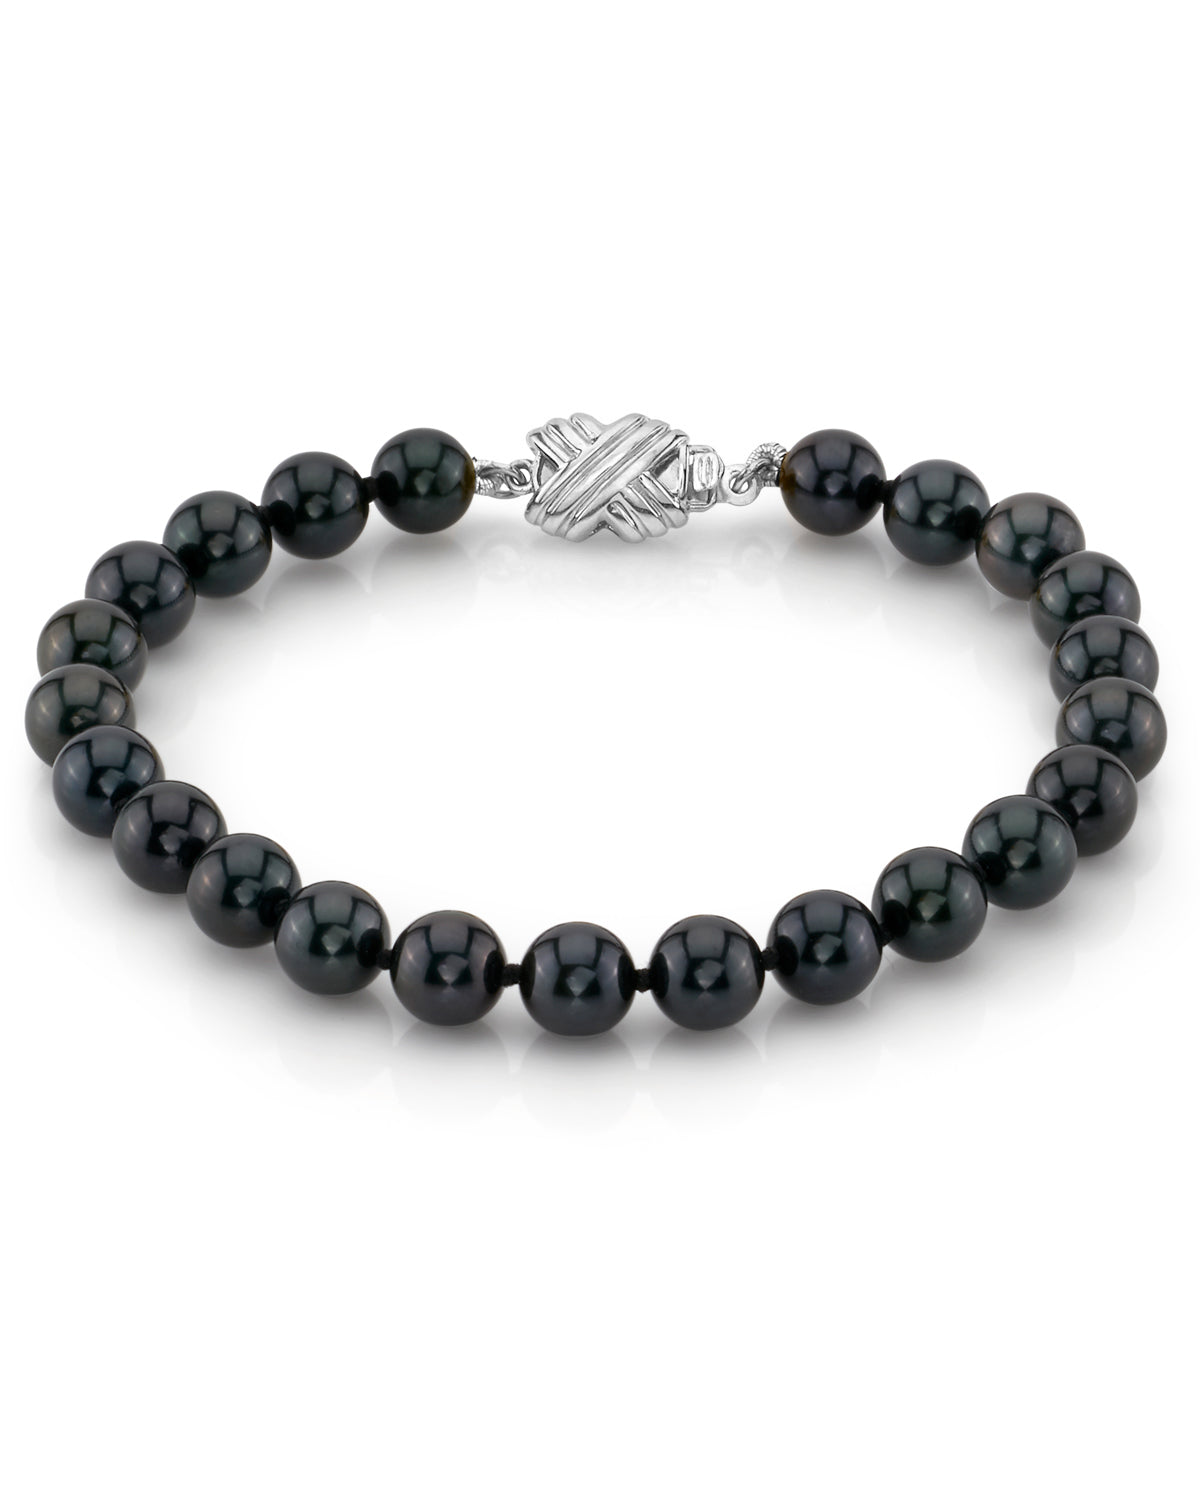 Men's Pearl Bracelet | Turquoise/Black/Grey Seed Beads – Strands and Bands  by Fran